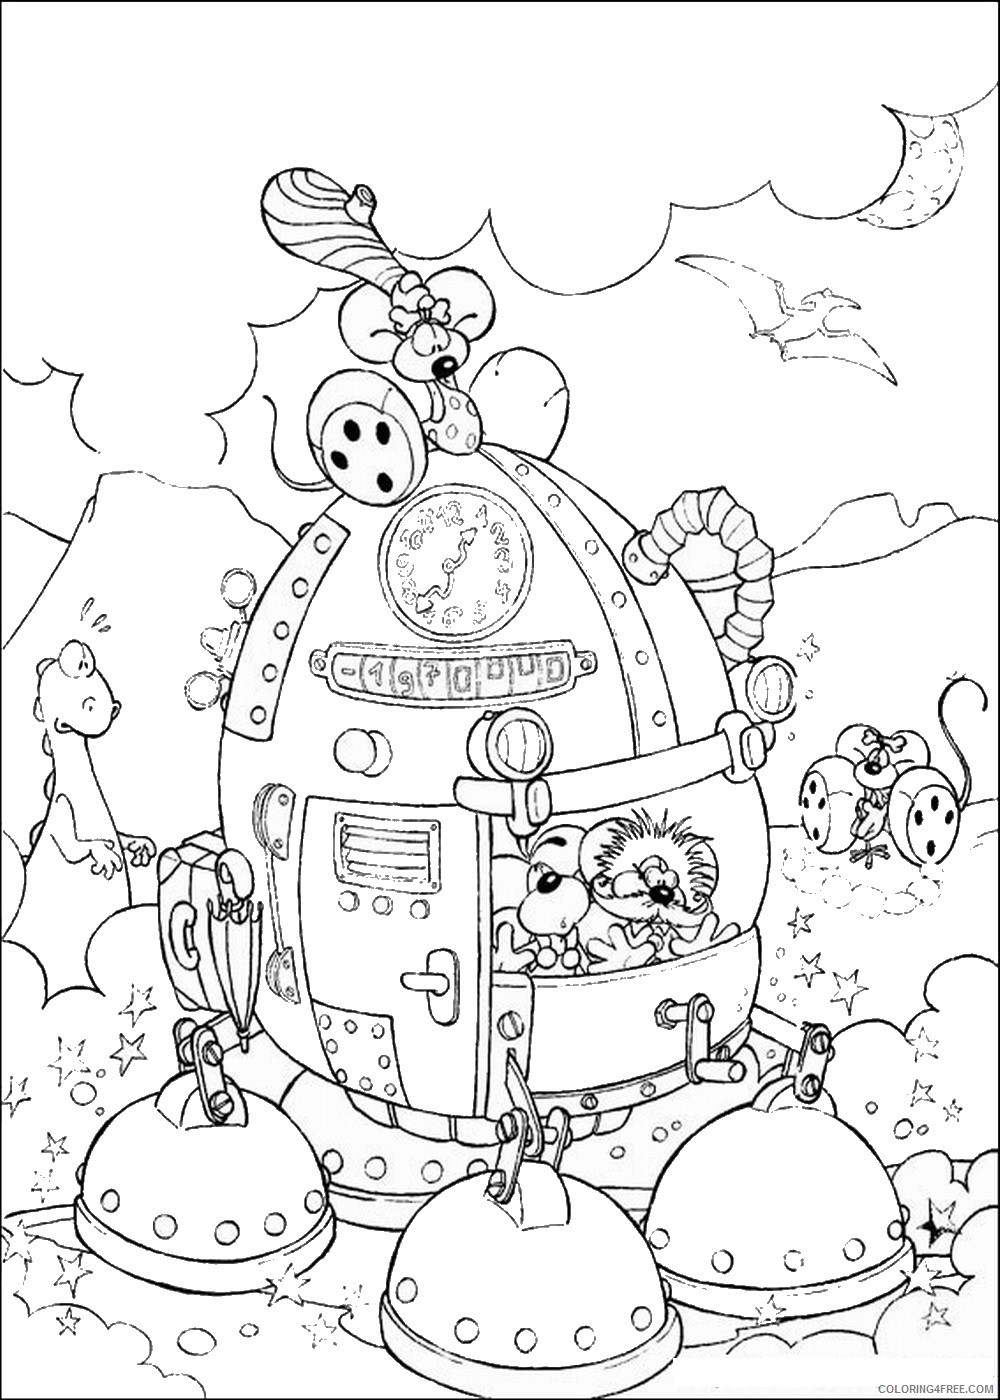 Diddl Coloring Pages Cartoons diddl_coloring18 Printable 2020 2053 Coloring4free